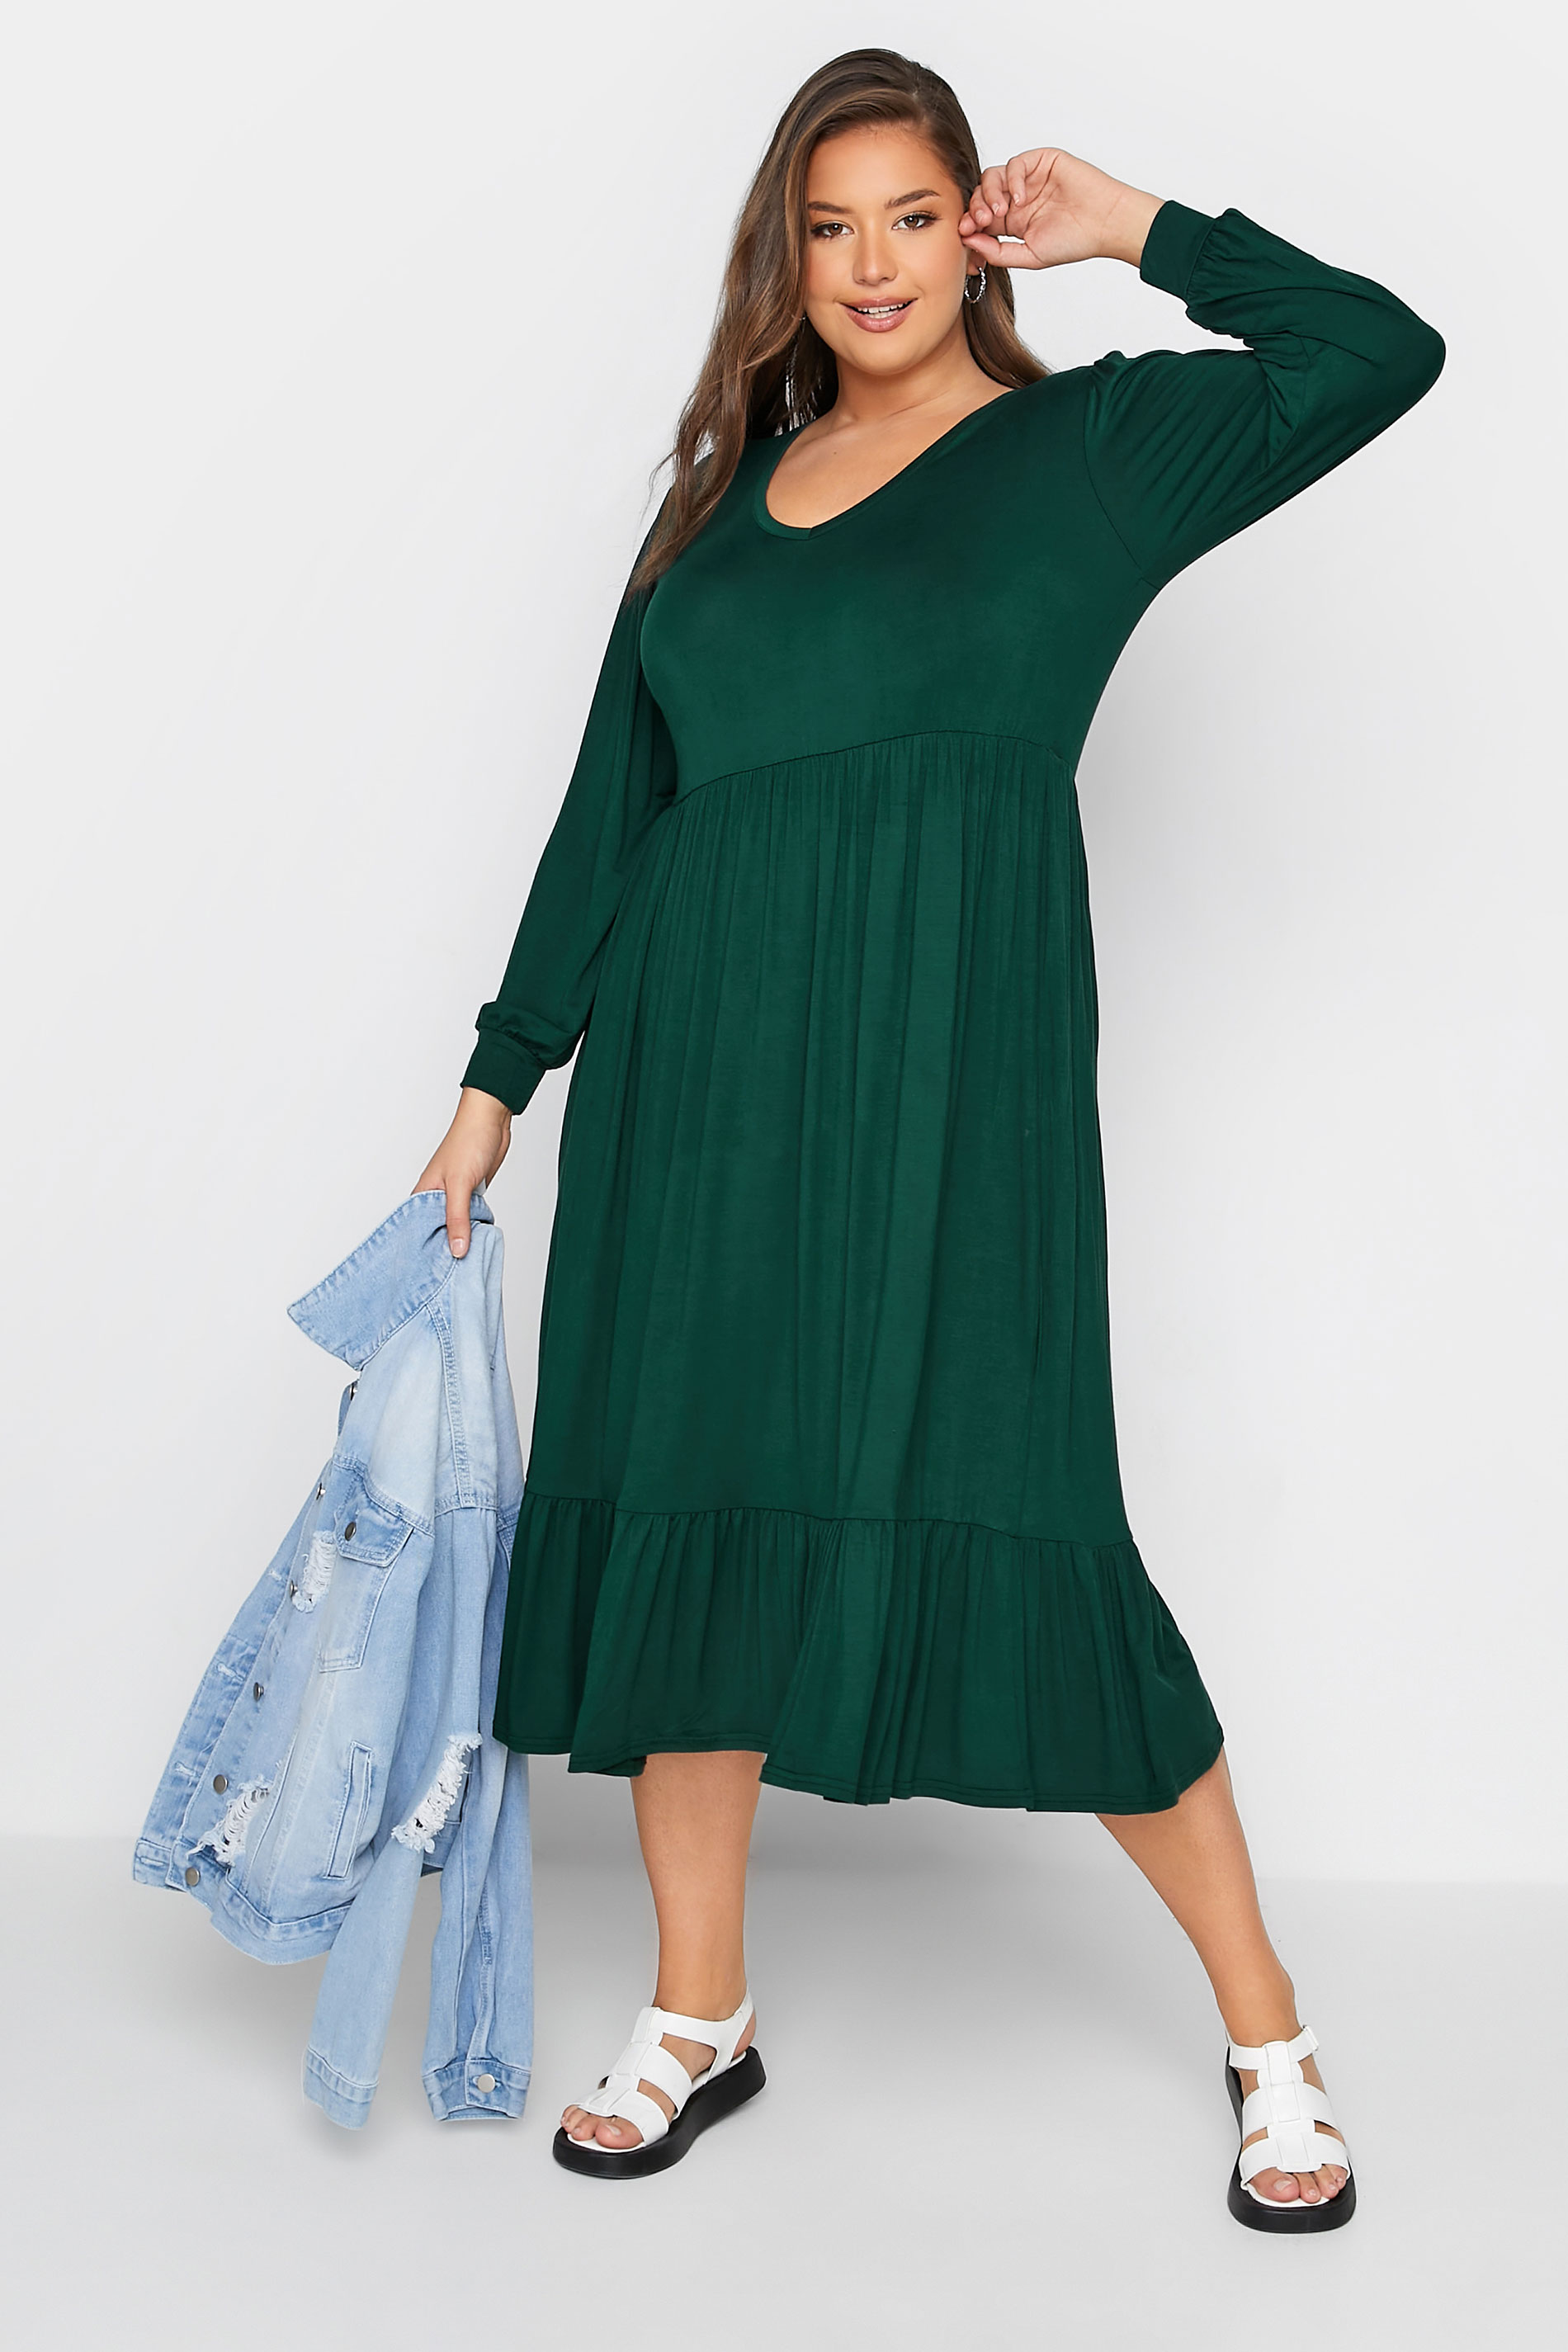 Robes Grande Taille Grande taille  Robes Manches Longues | LIMITED COLLECTION - Robe Verte Longue Smocké Volanté - OI20330